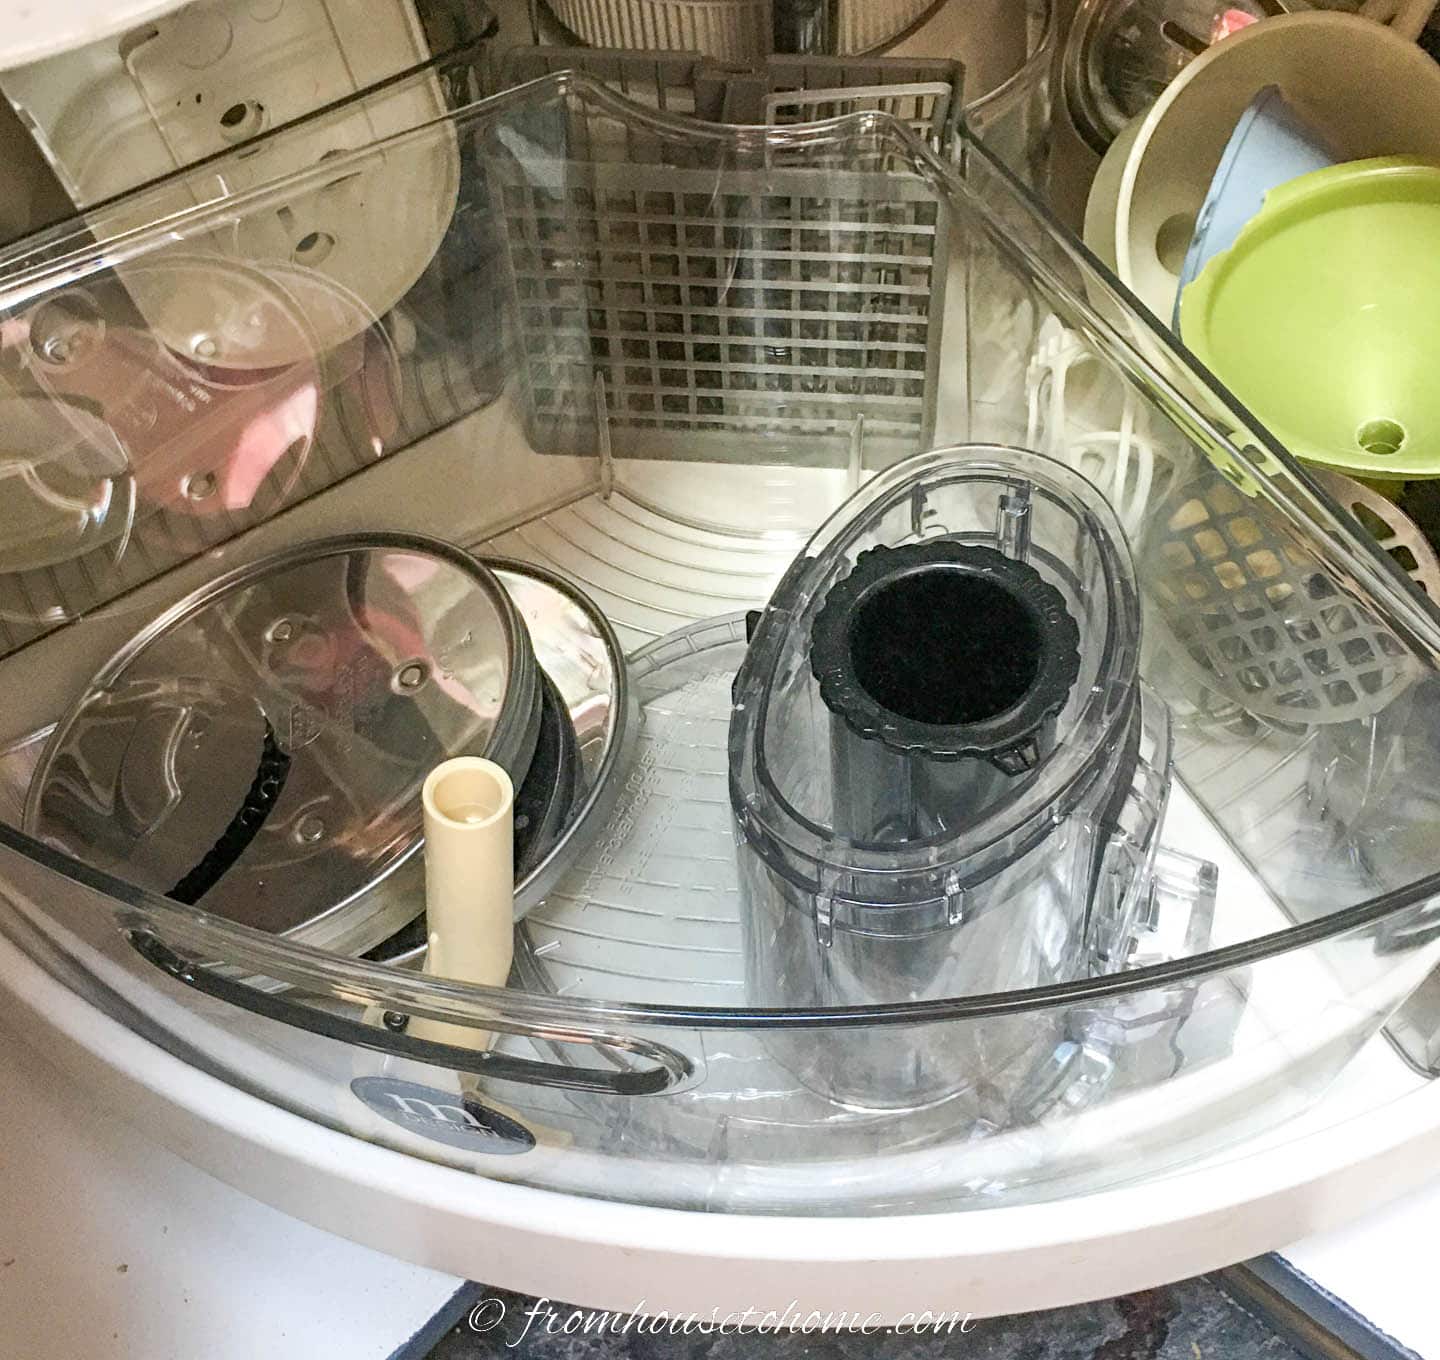 Clear pie-shaped kitchen organizers in a lazy Susan with kitchen accessories inside